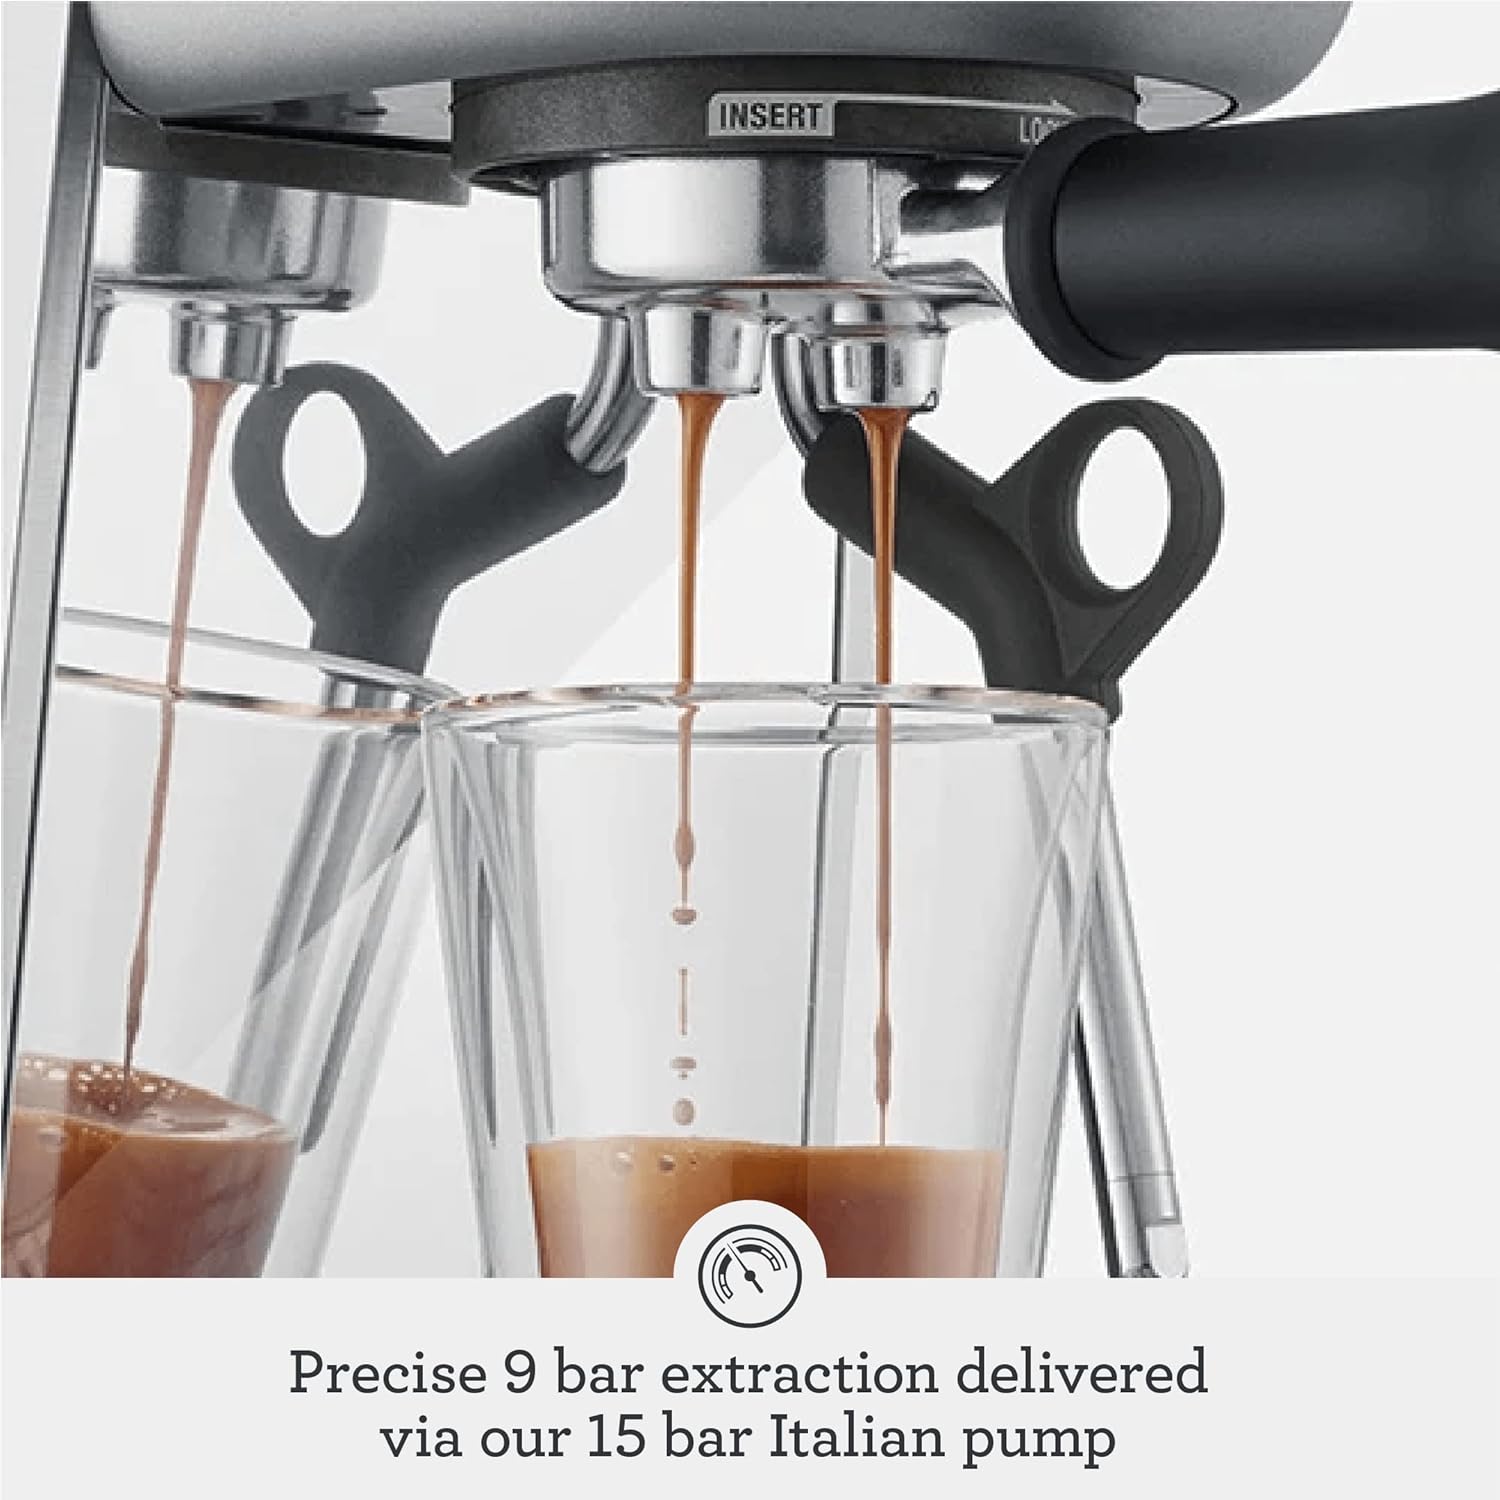 Breville Bambino Espresso Machine,47 Fluid Ounces, Stainless Steel